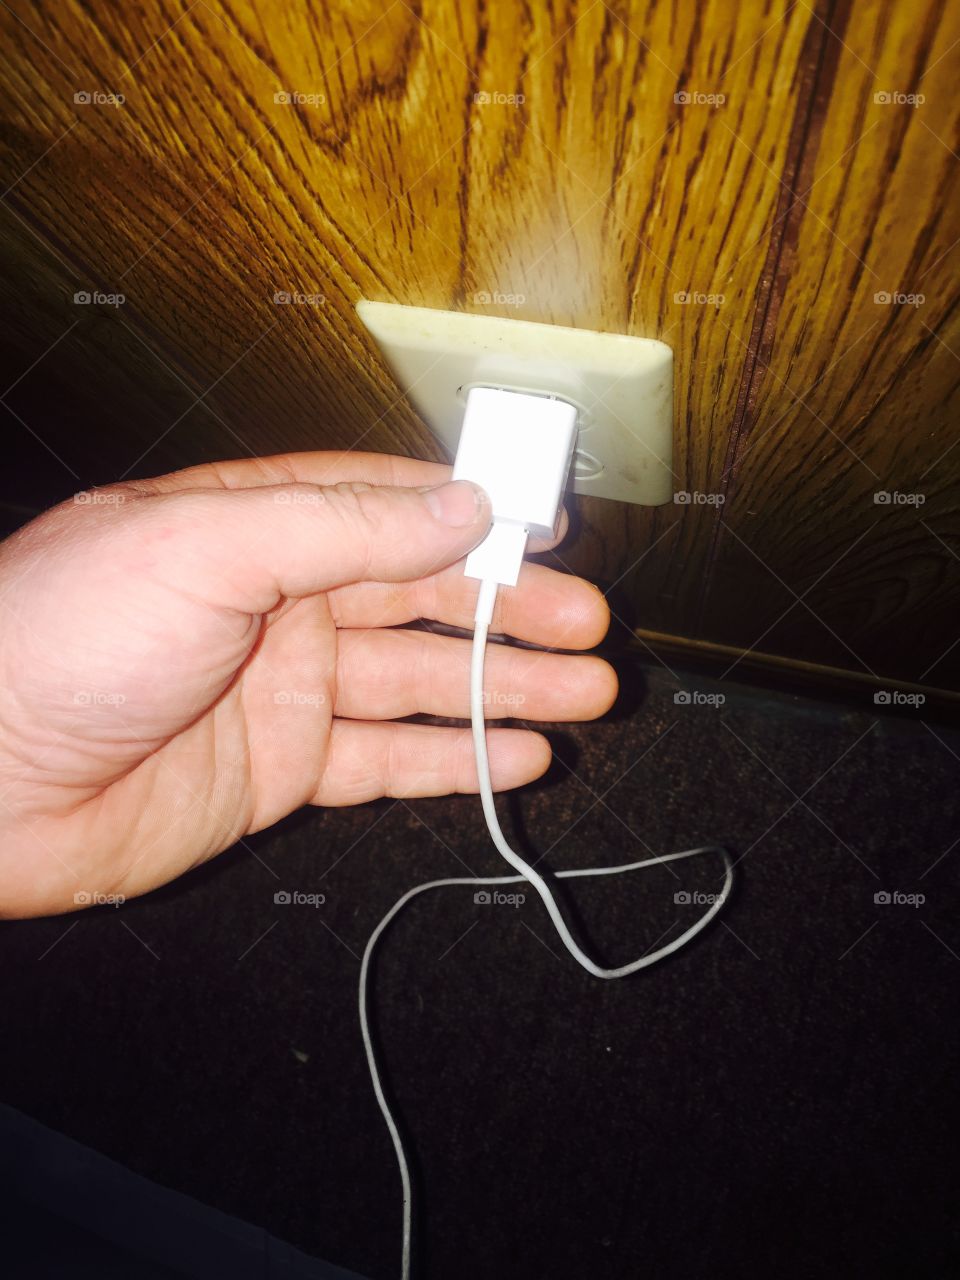 Hand plugging in USB charger for apple iphone